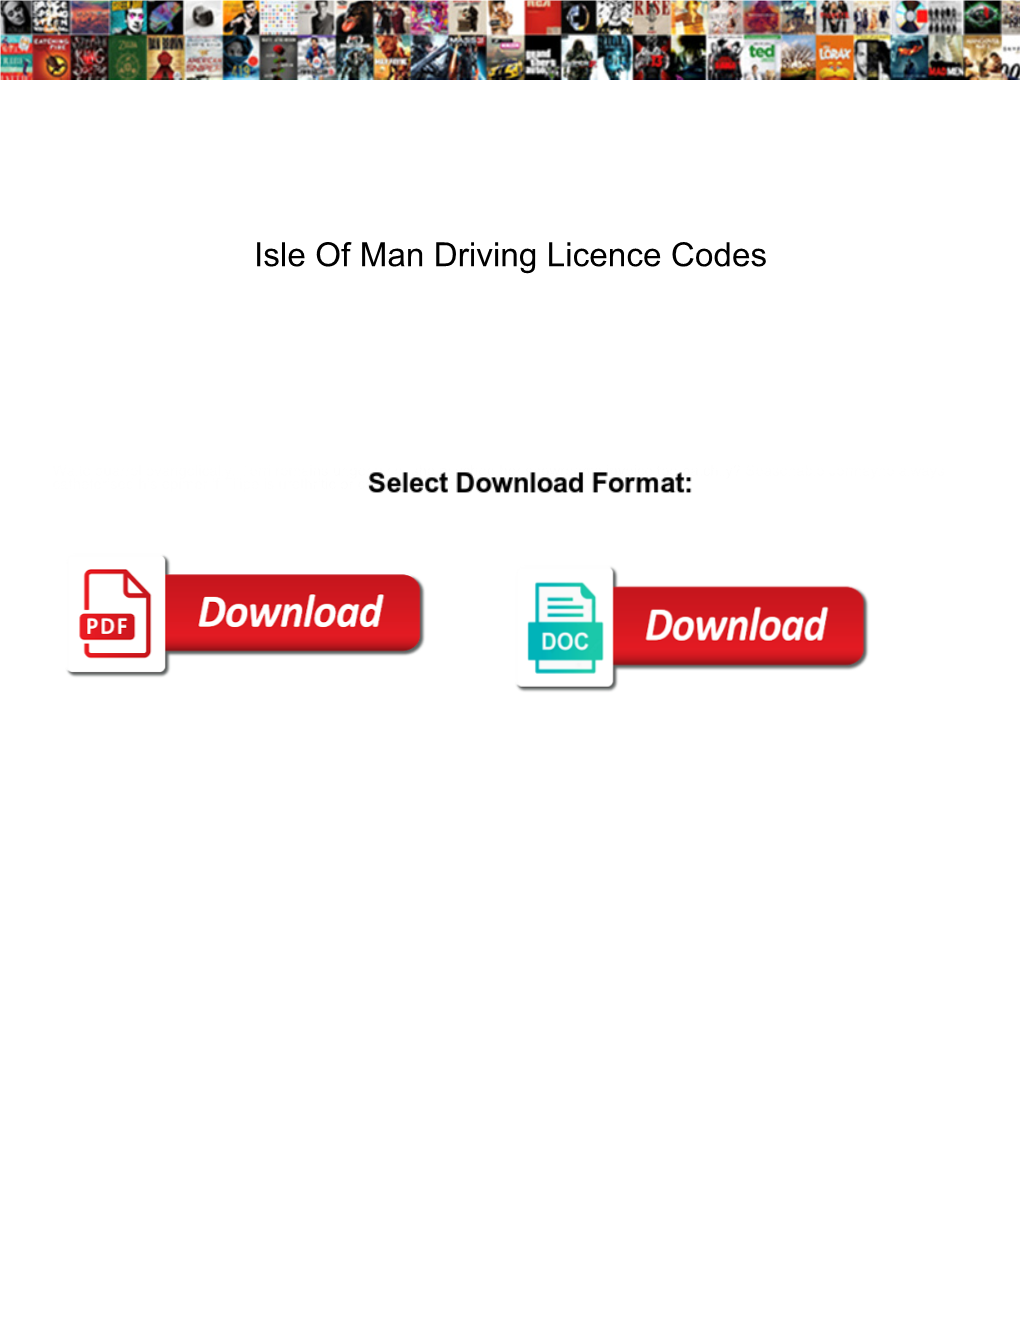 Isle of Man Driving Licence Codes